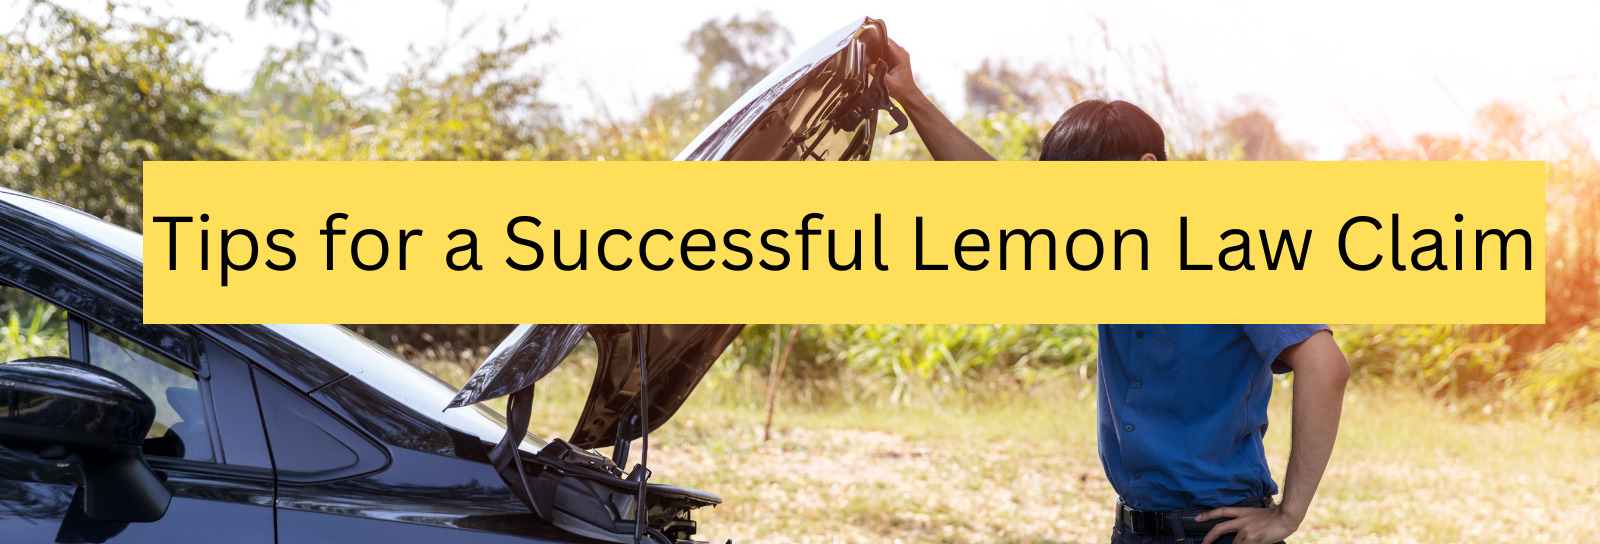 Tips for a Successful Lemon Law Claim: From Dealer Visits to Legal Representation